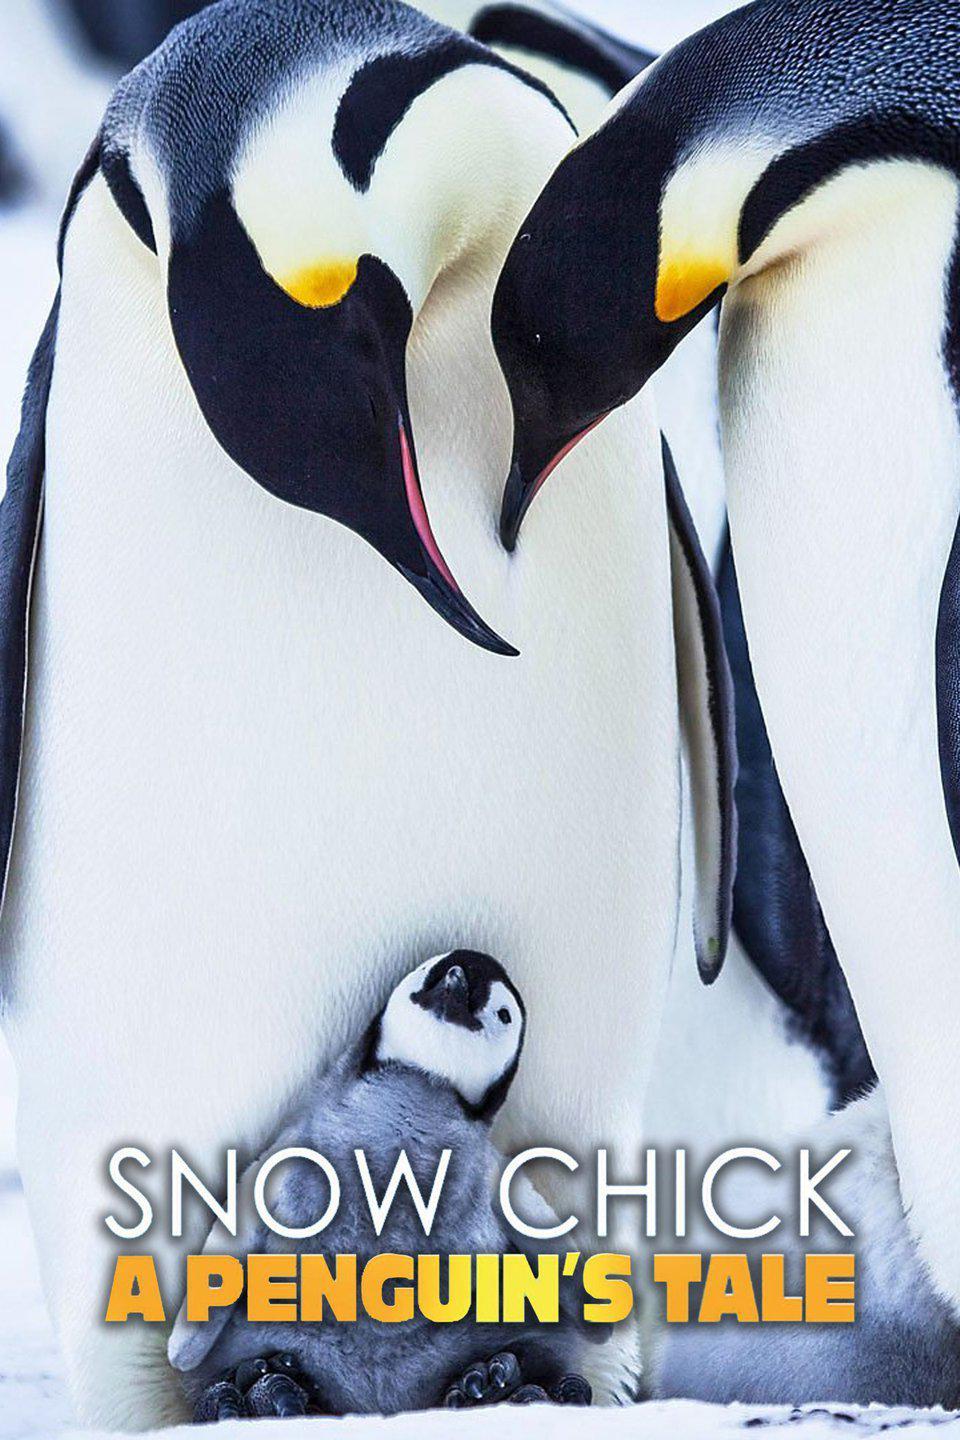 TV ratings for Snow Chick: A Penguin's Tale in Turquía. BBC One TV series